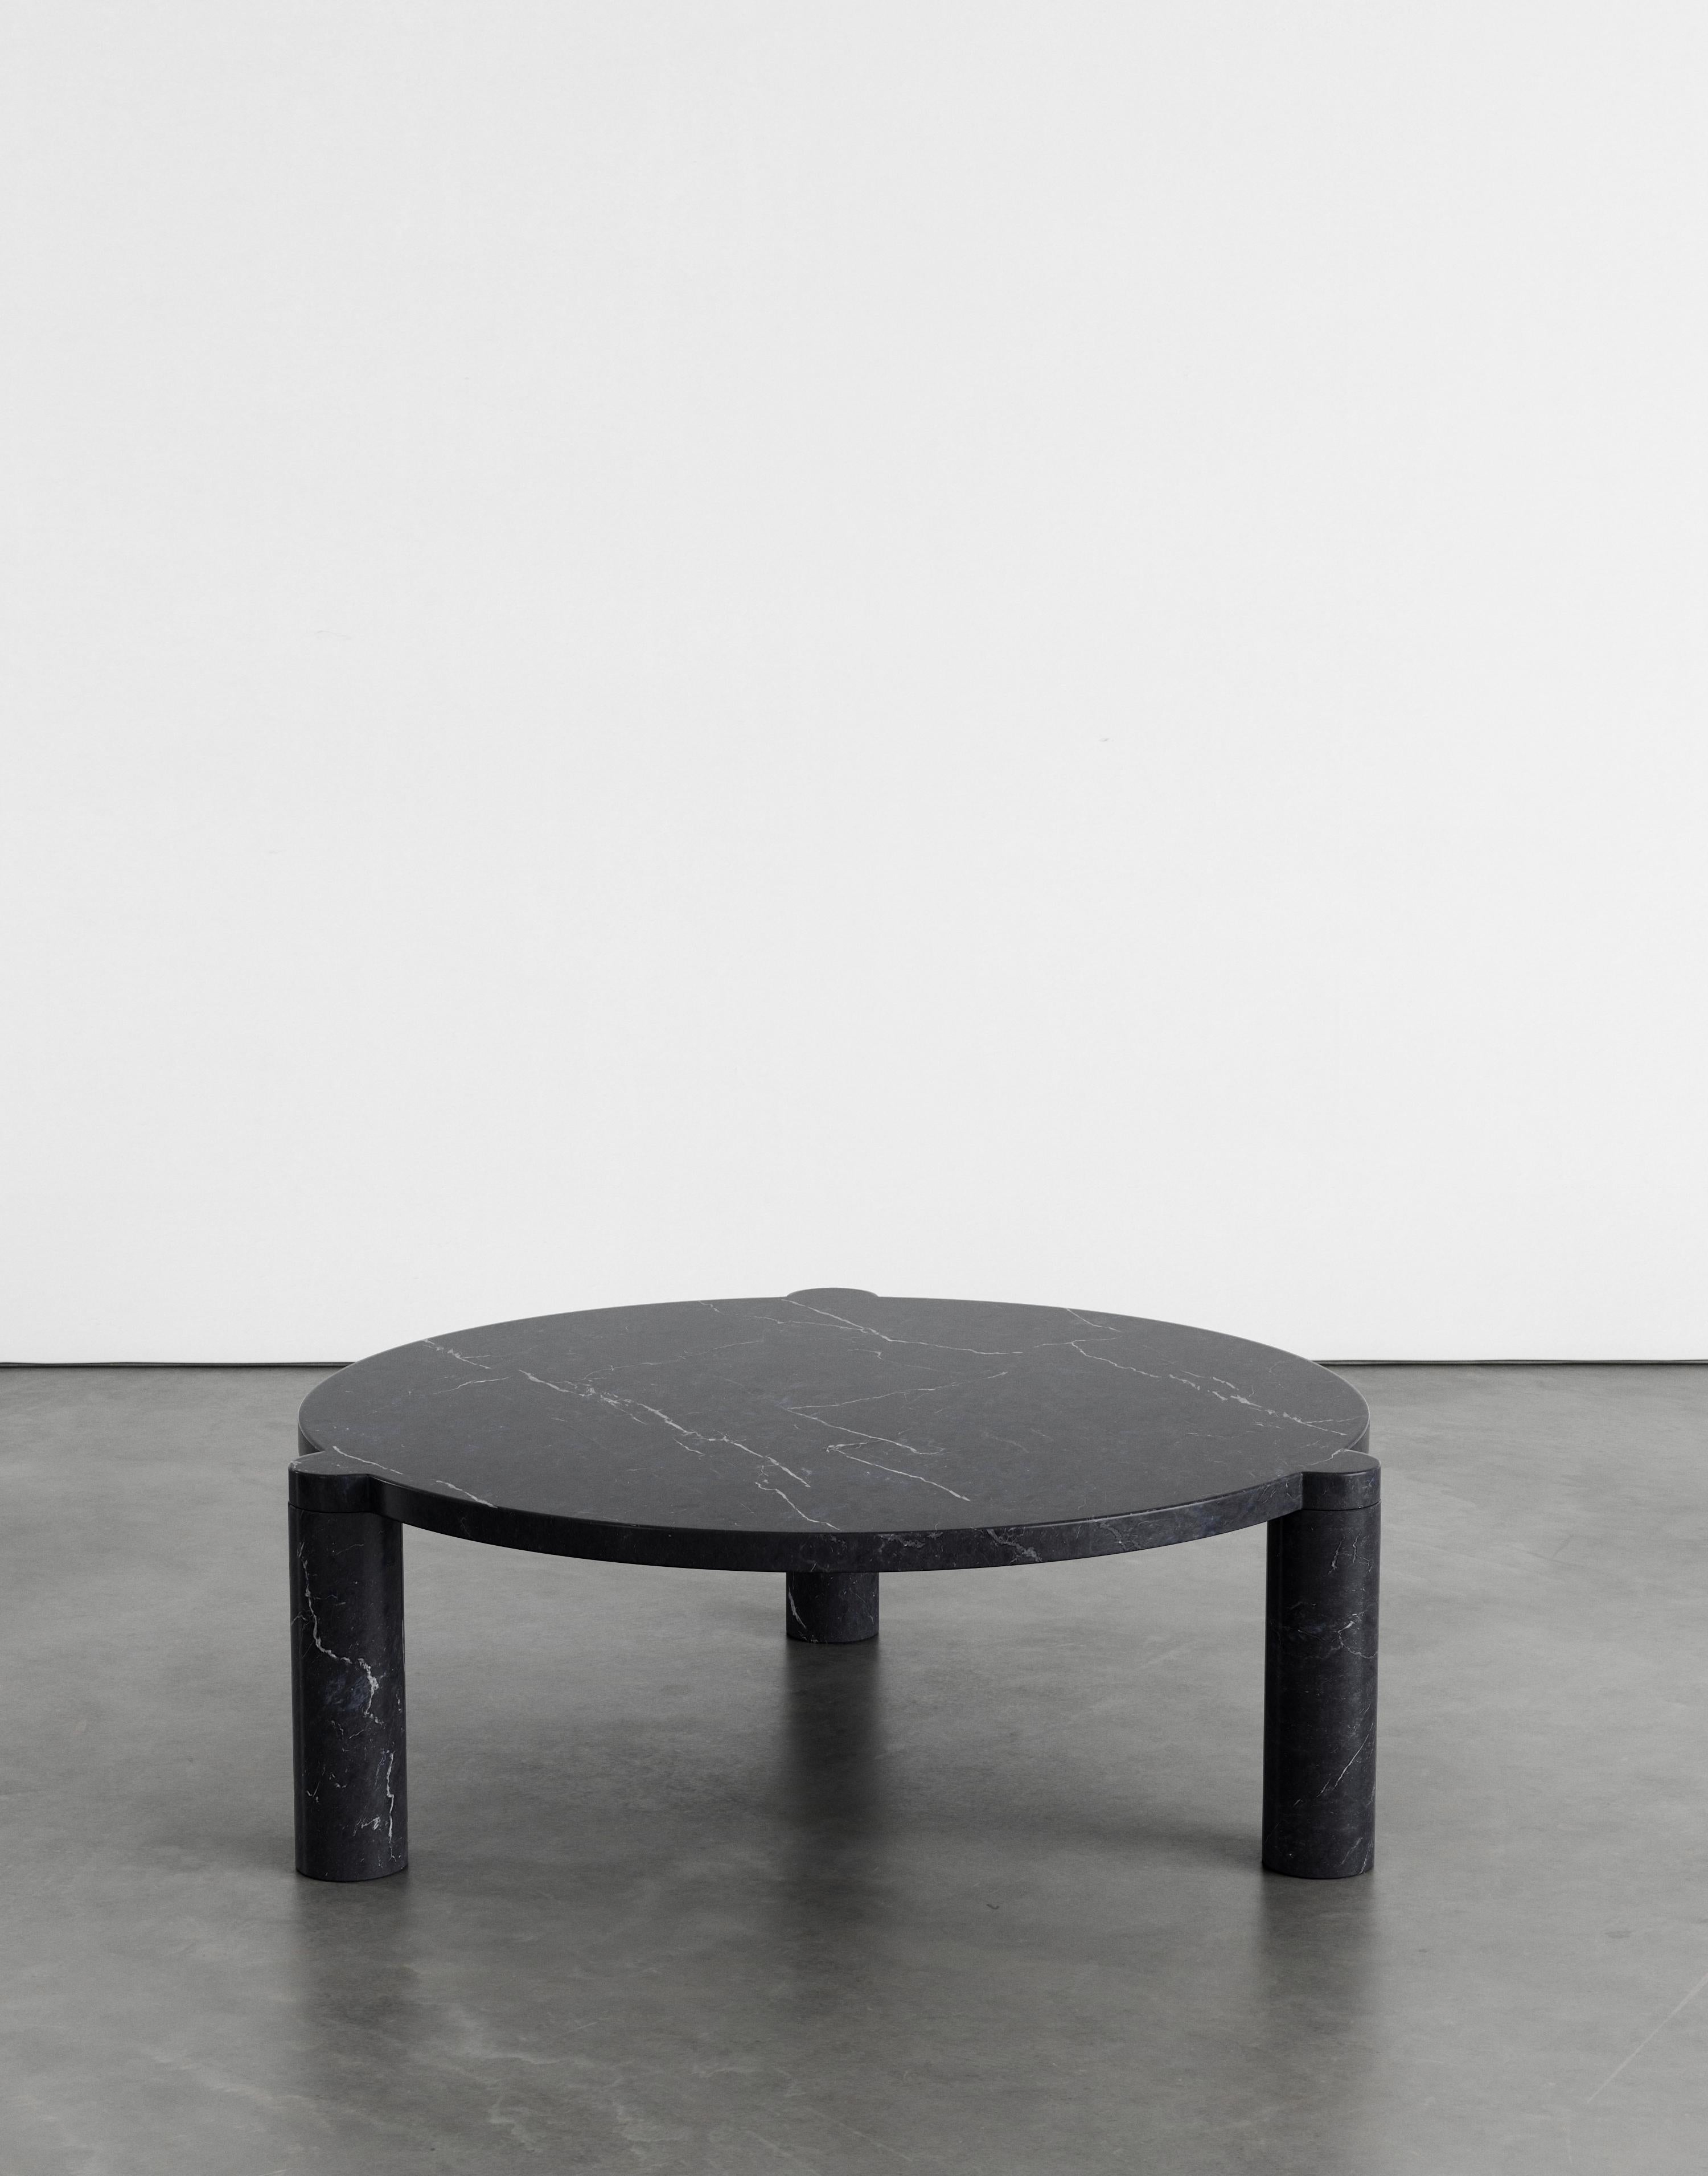 Alexis 90 coffee table by Agglomerati. 
Dimensions: W 90 x H 33 cm.
Materials: Black Marquina. Available in other stones. 

Agglomerati is a London-based studio creating distinctive stone furniture. Established in 2019 by Australian designer Sam